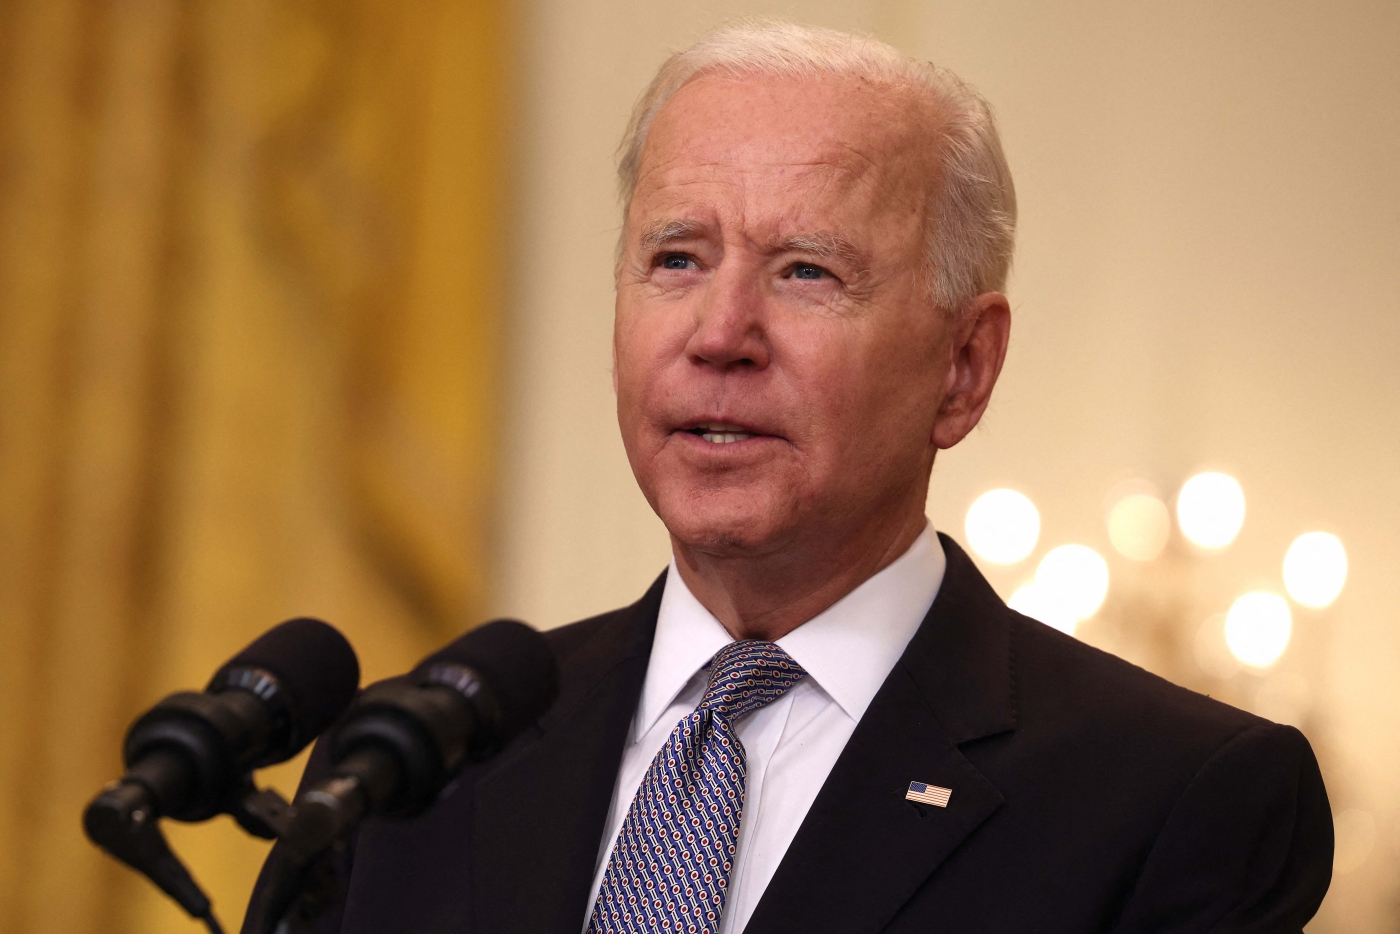 Biden's approach, in which he has consistently supported Israel's right to defend itself while failing to condemn Israeli attacks in Gaza, has been criticised by progressive Democrats.